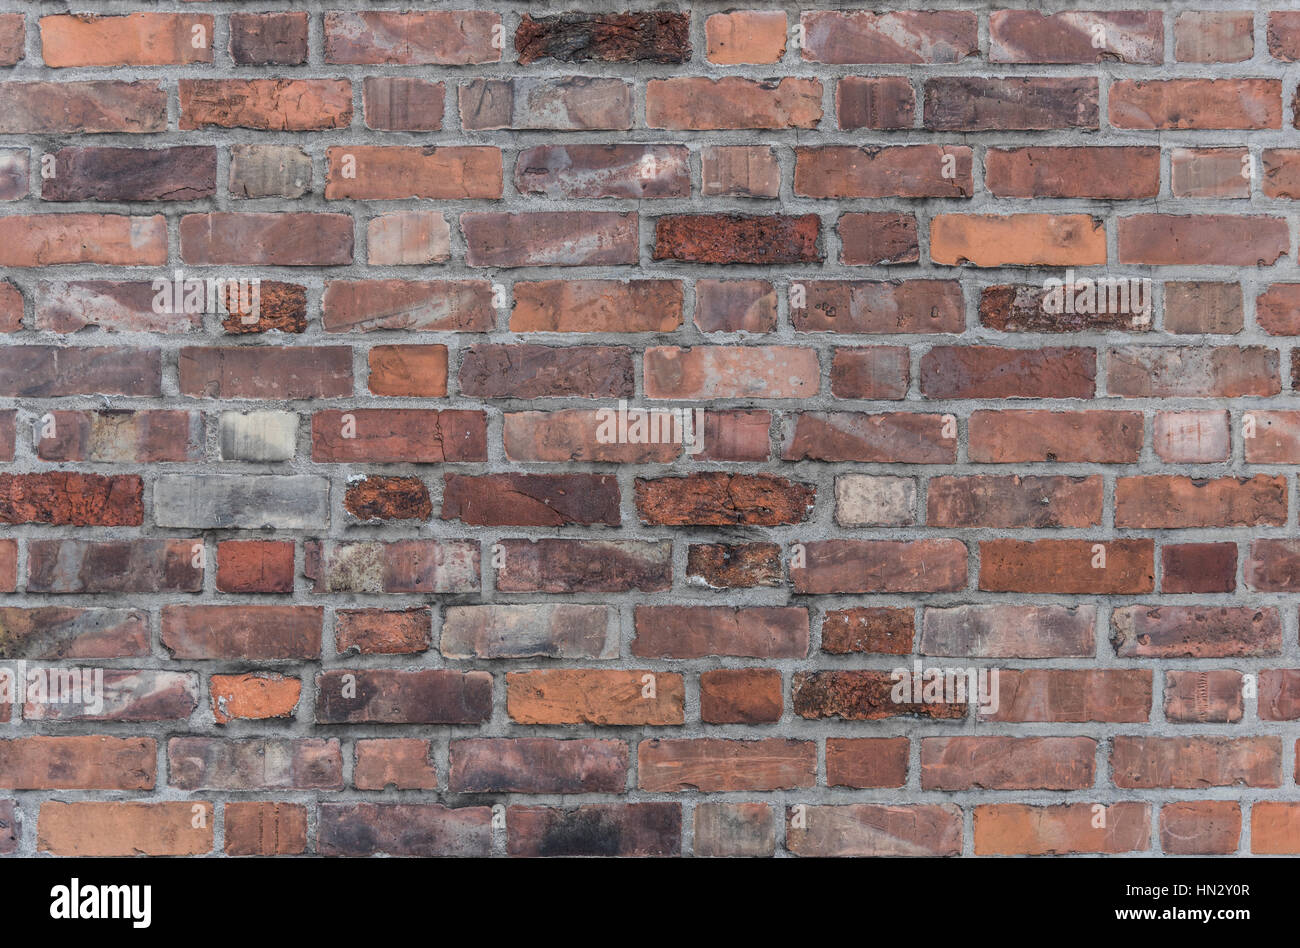 red brick wall stone texture background Stock Photo